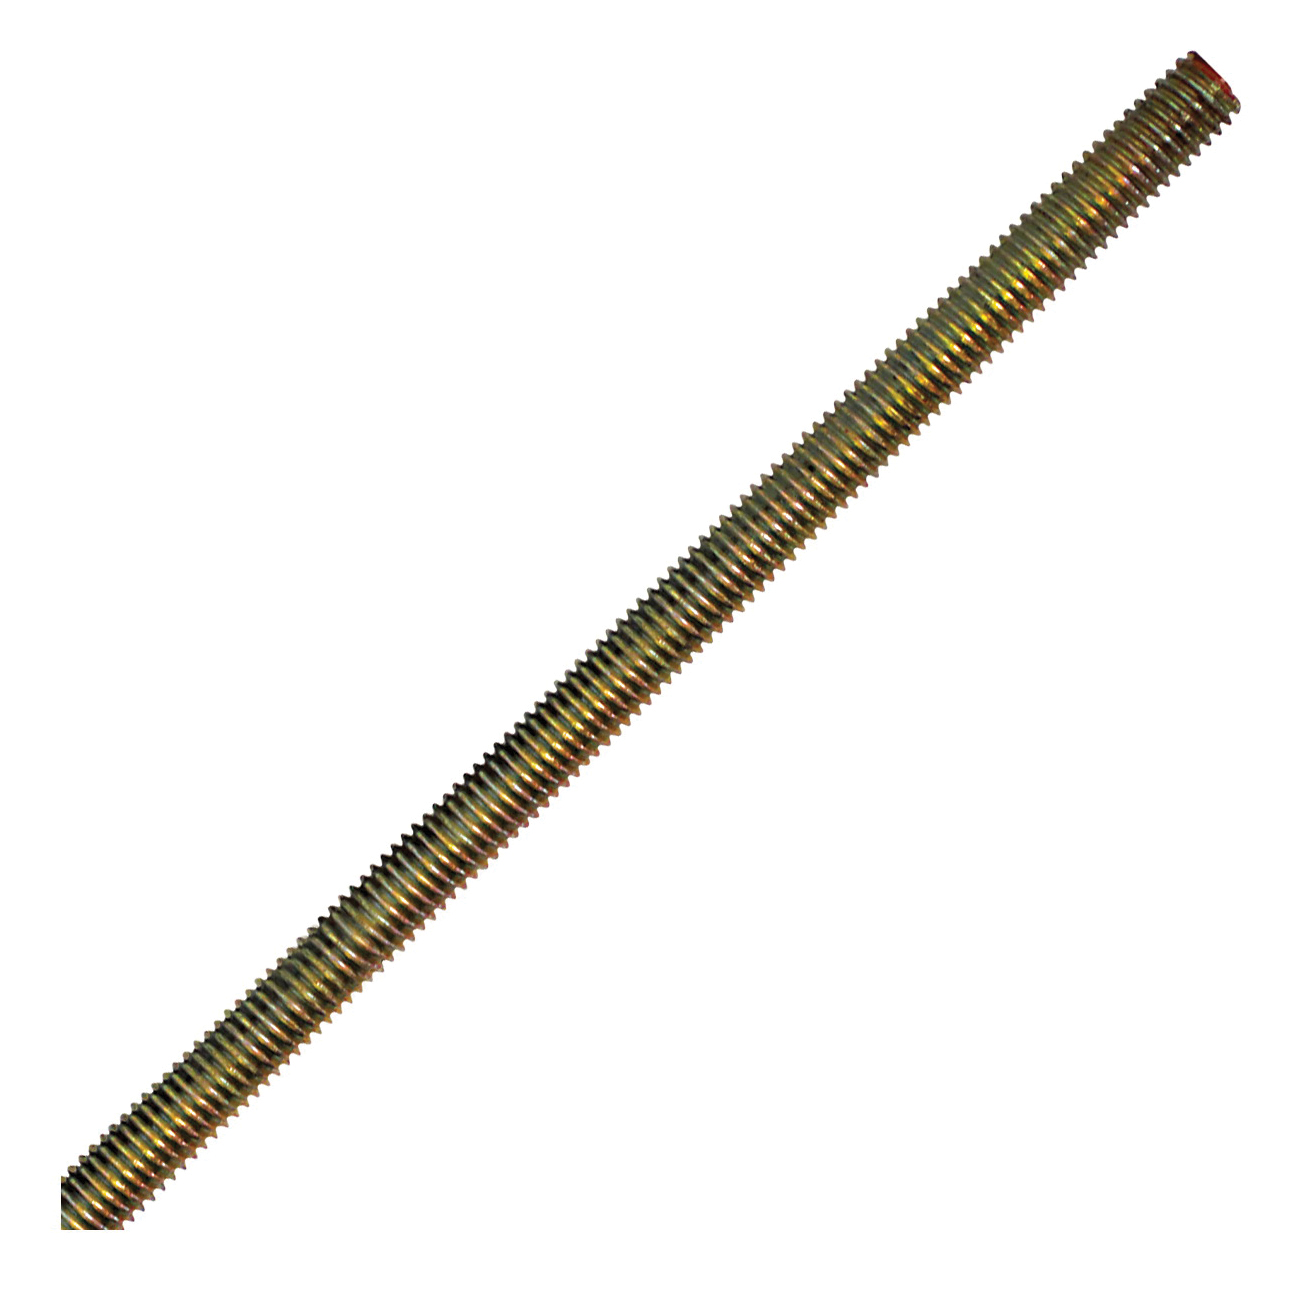 Paulin® Papco® 141-553 Papcolloy Uni-Rod® 141 Heat Treated High Strength Fully Threaded Rod, 7/16-14, 36 in OAL, Carbon Steel, Yellow Zinc Dichromate Plated